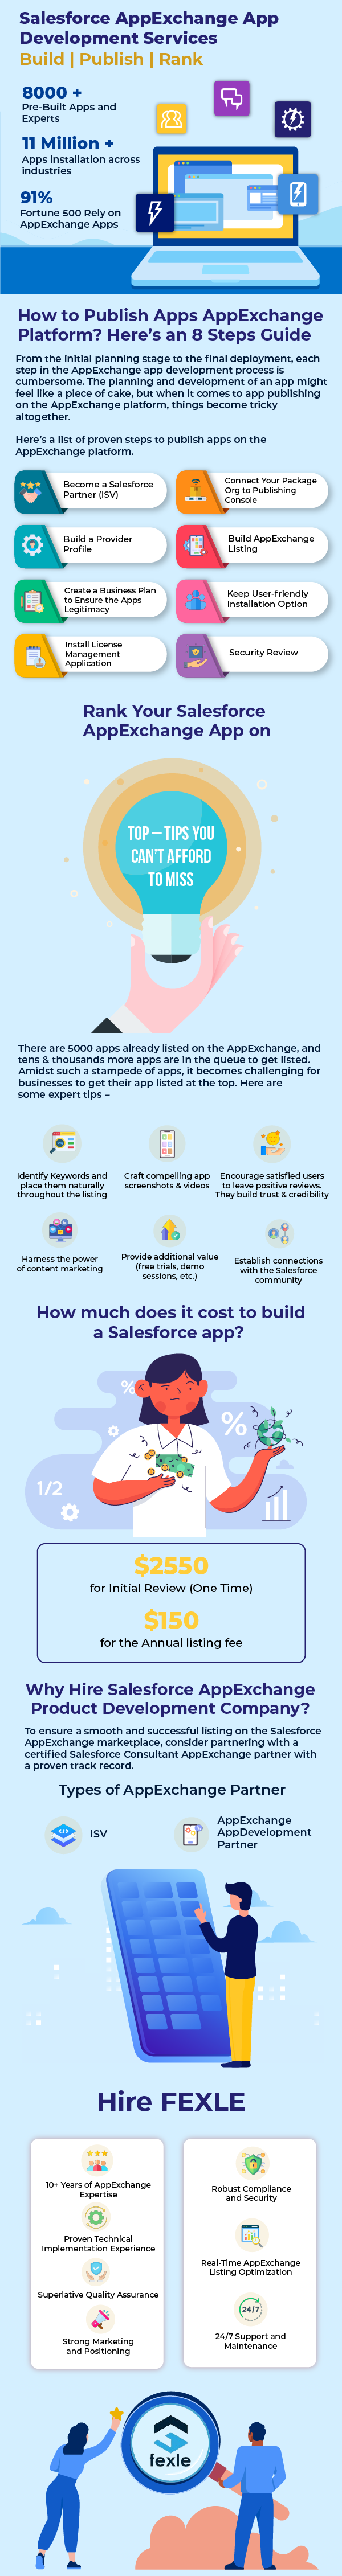 Harness the Power of Salesforce with Custom App Development Services | FEXLE Services